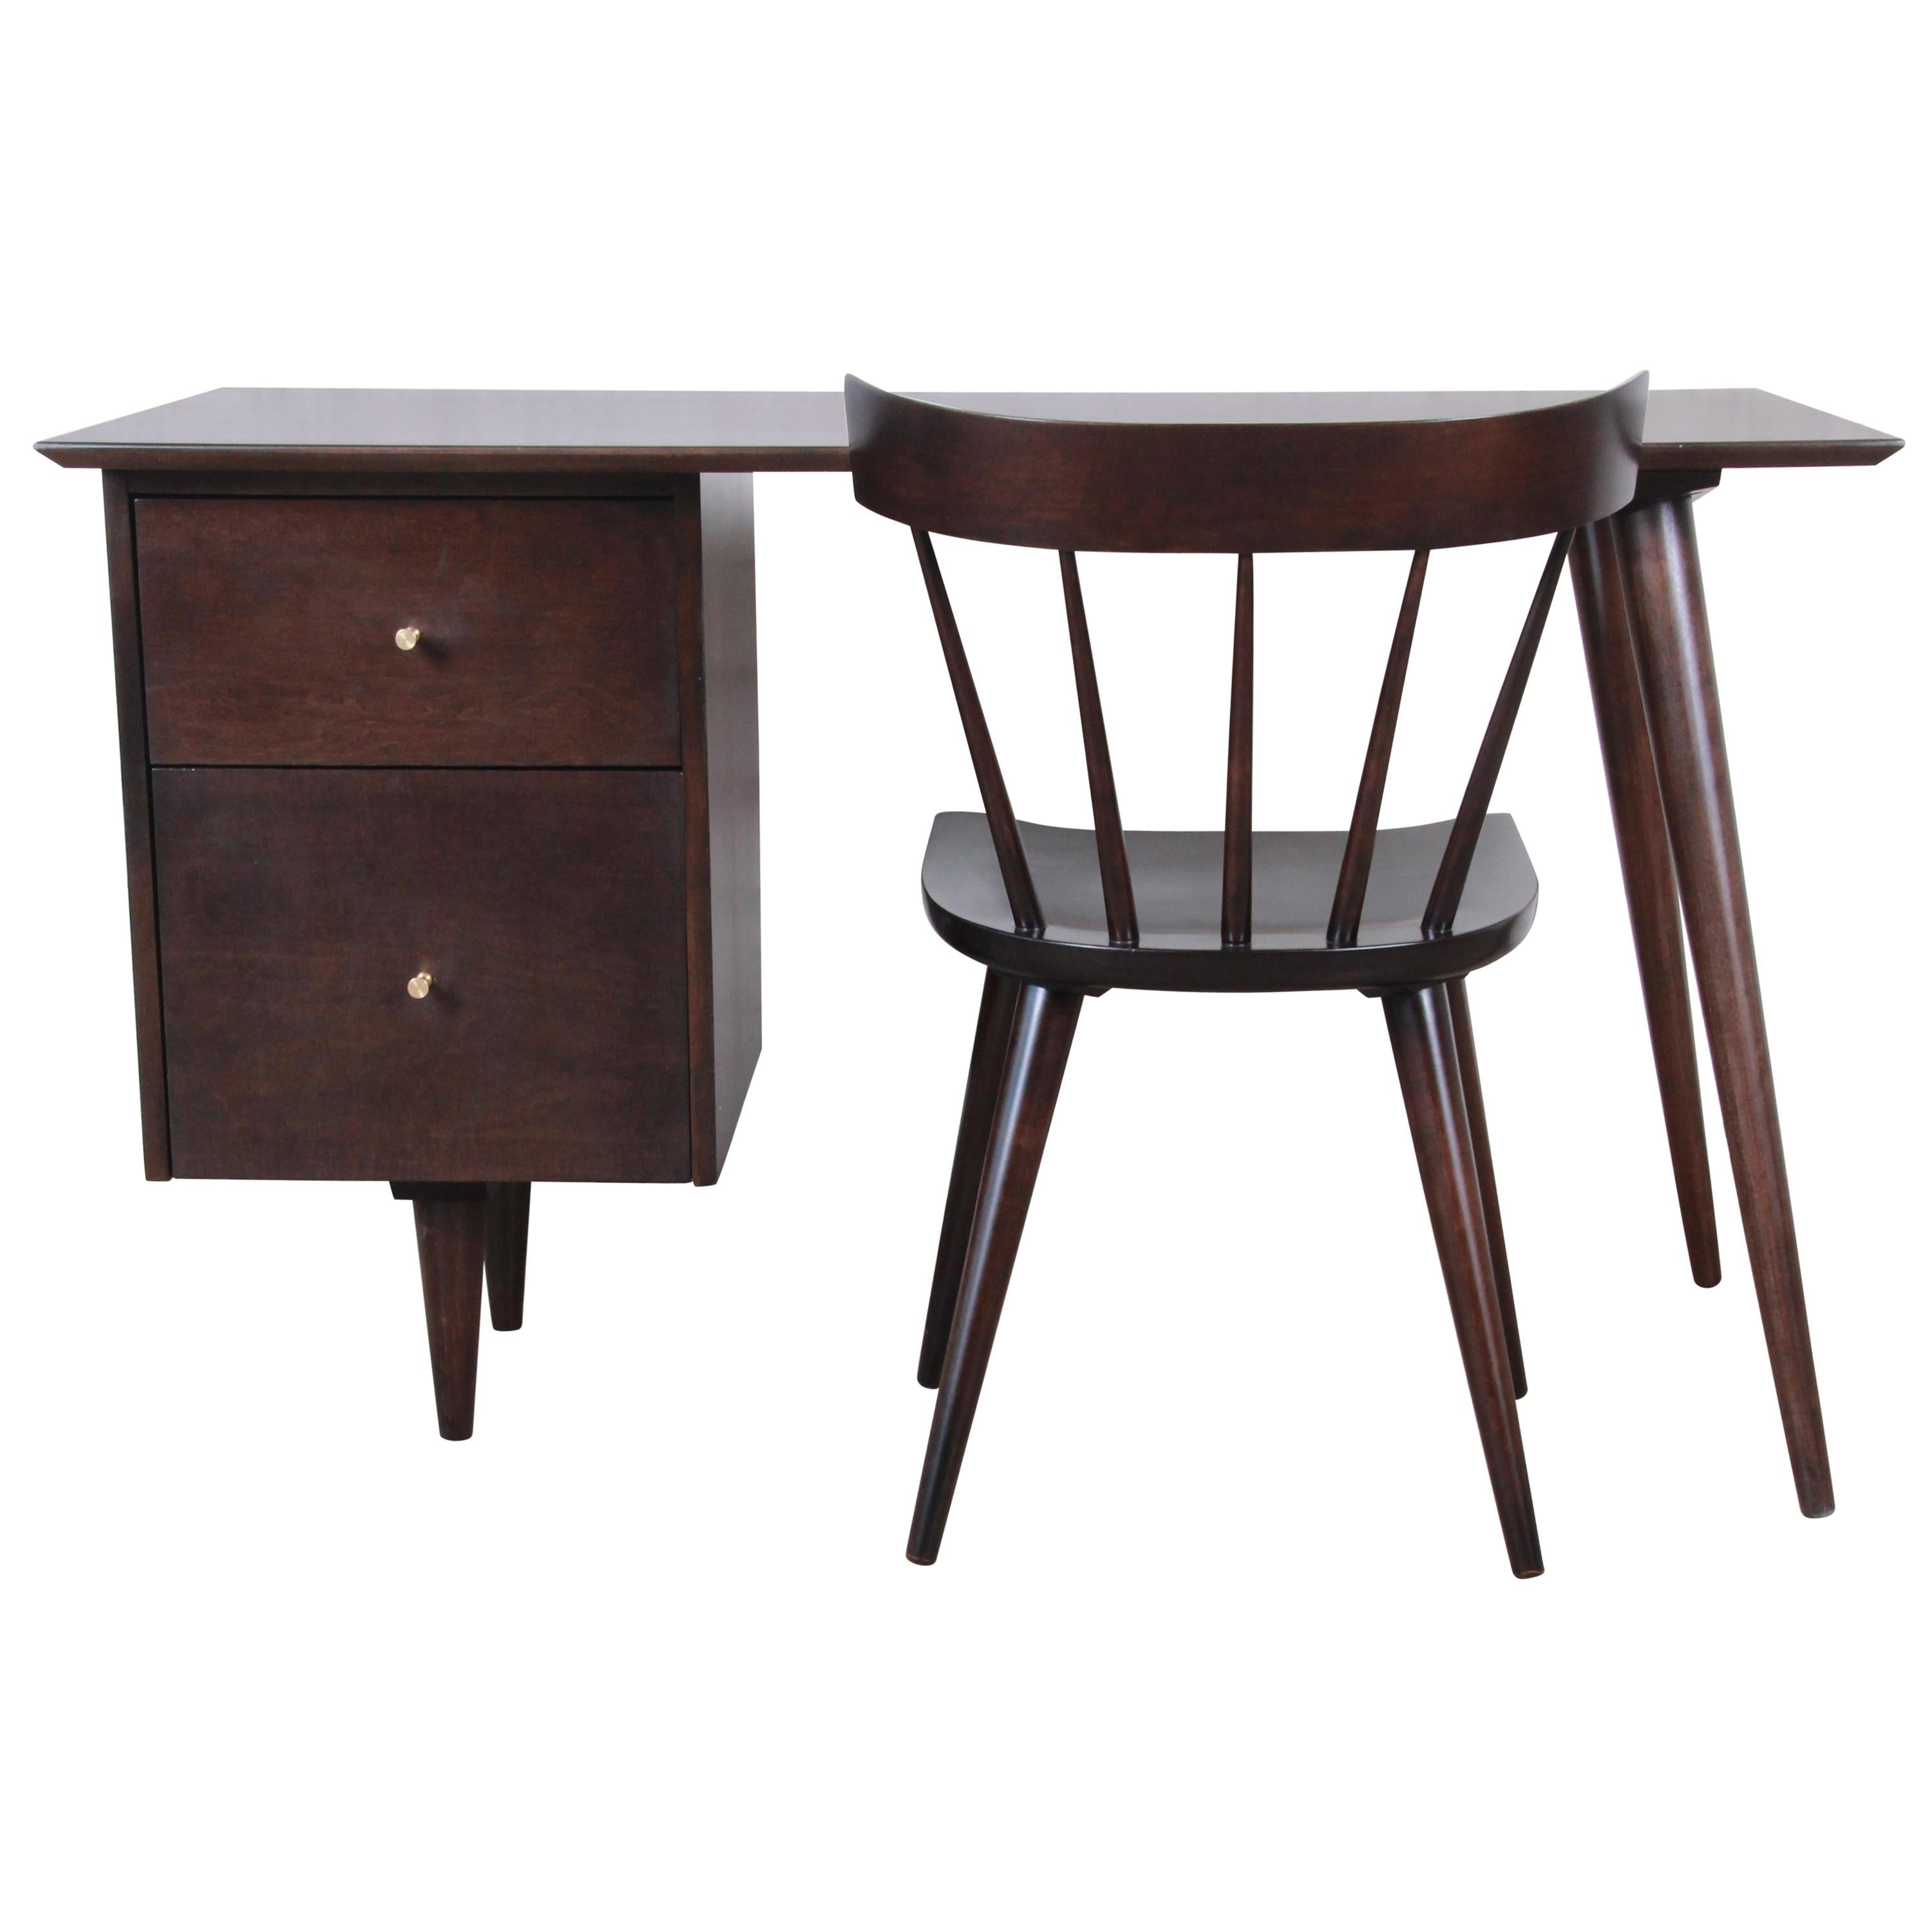 Paul McCobb Mid-Century Modern Planner Group Desk and Chair, Newly Restored